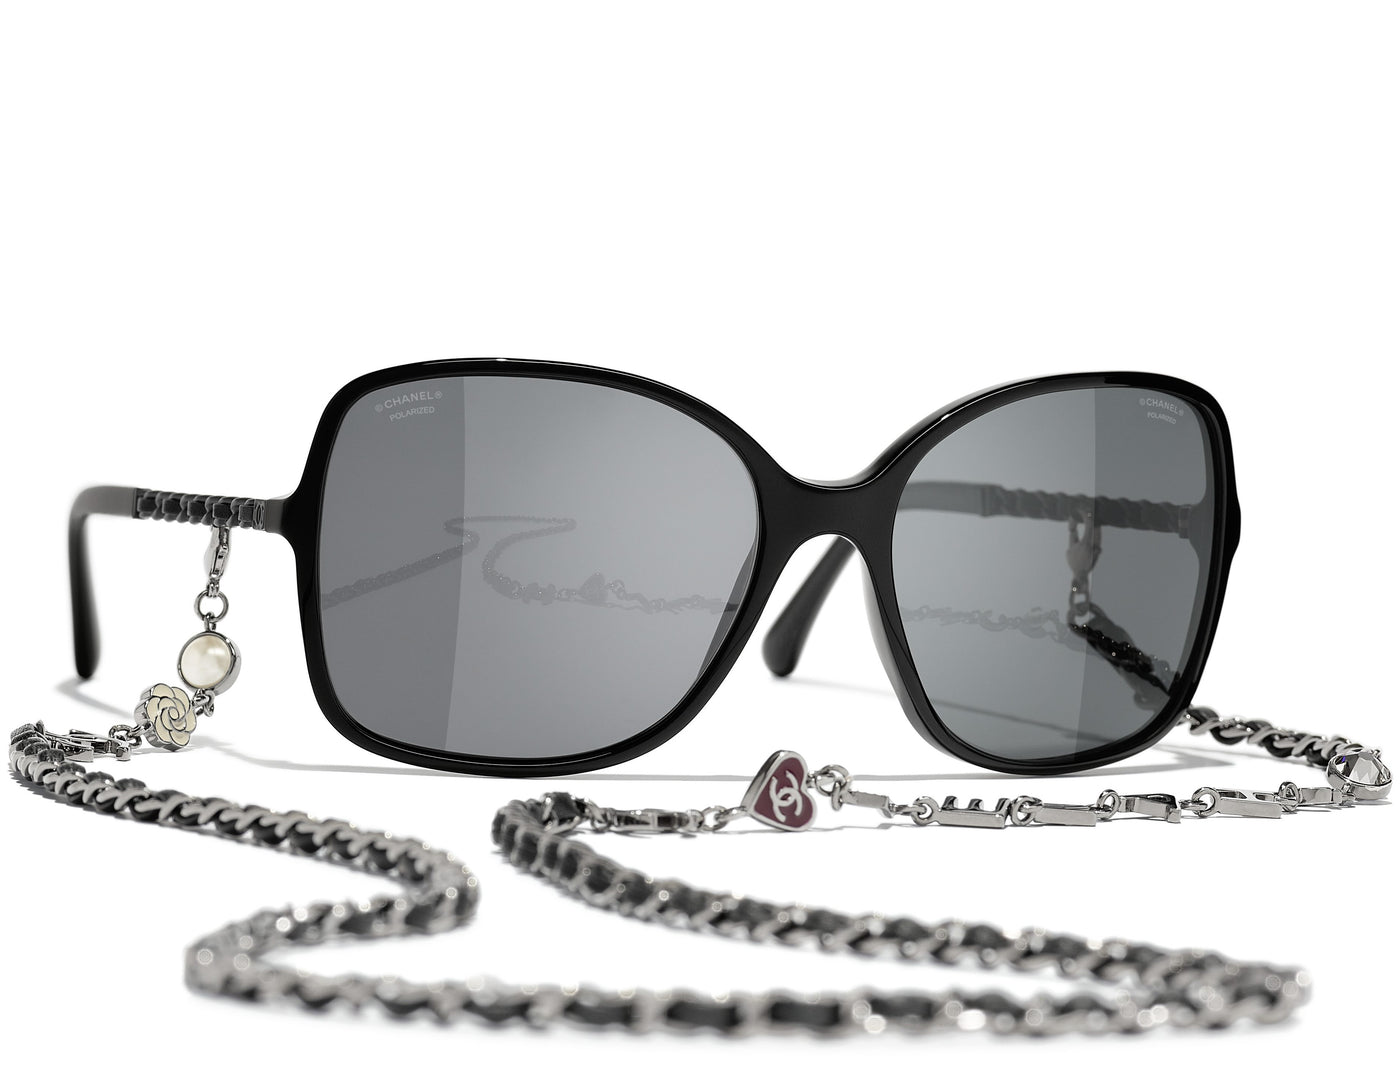 Cat eye Coco Chanel style sunglasses with black armor and purple